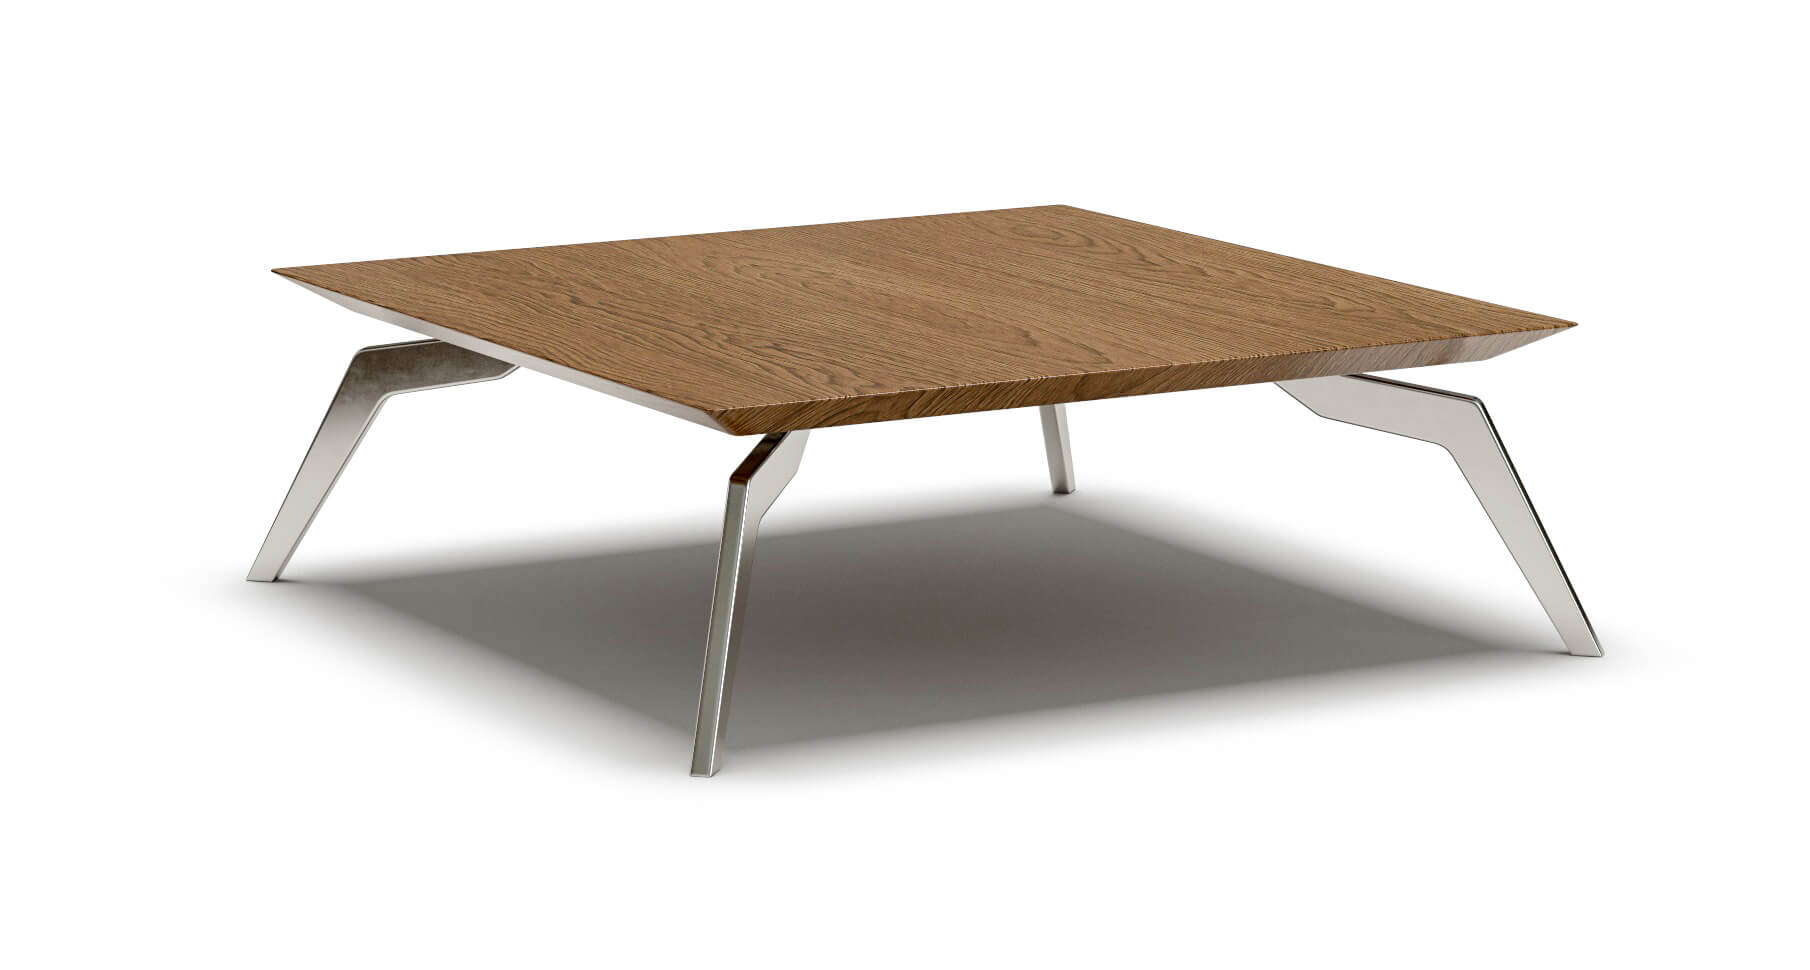 Carre table